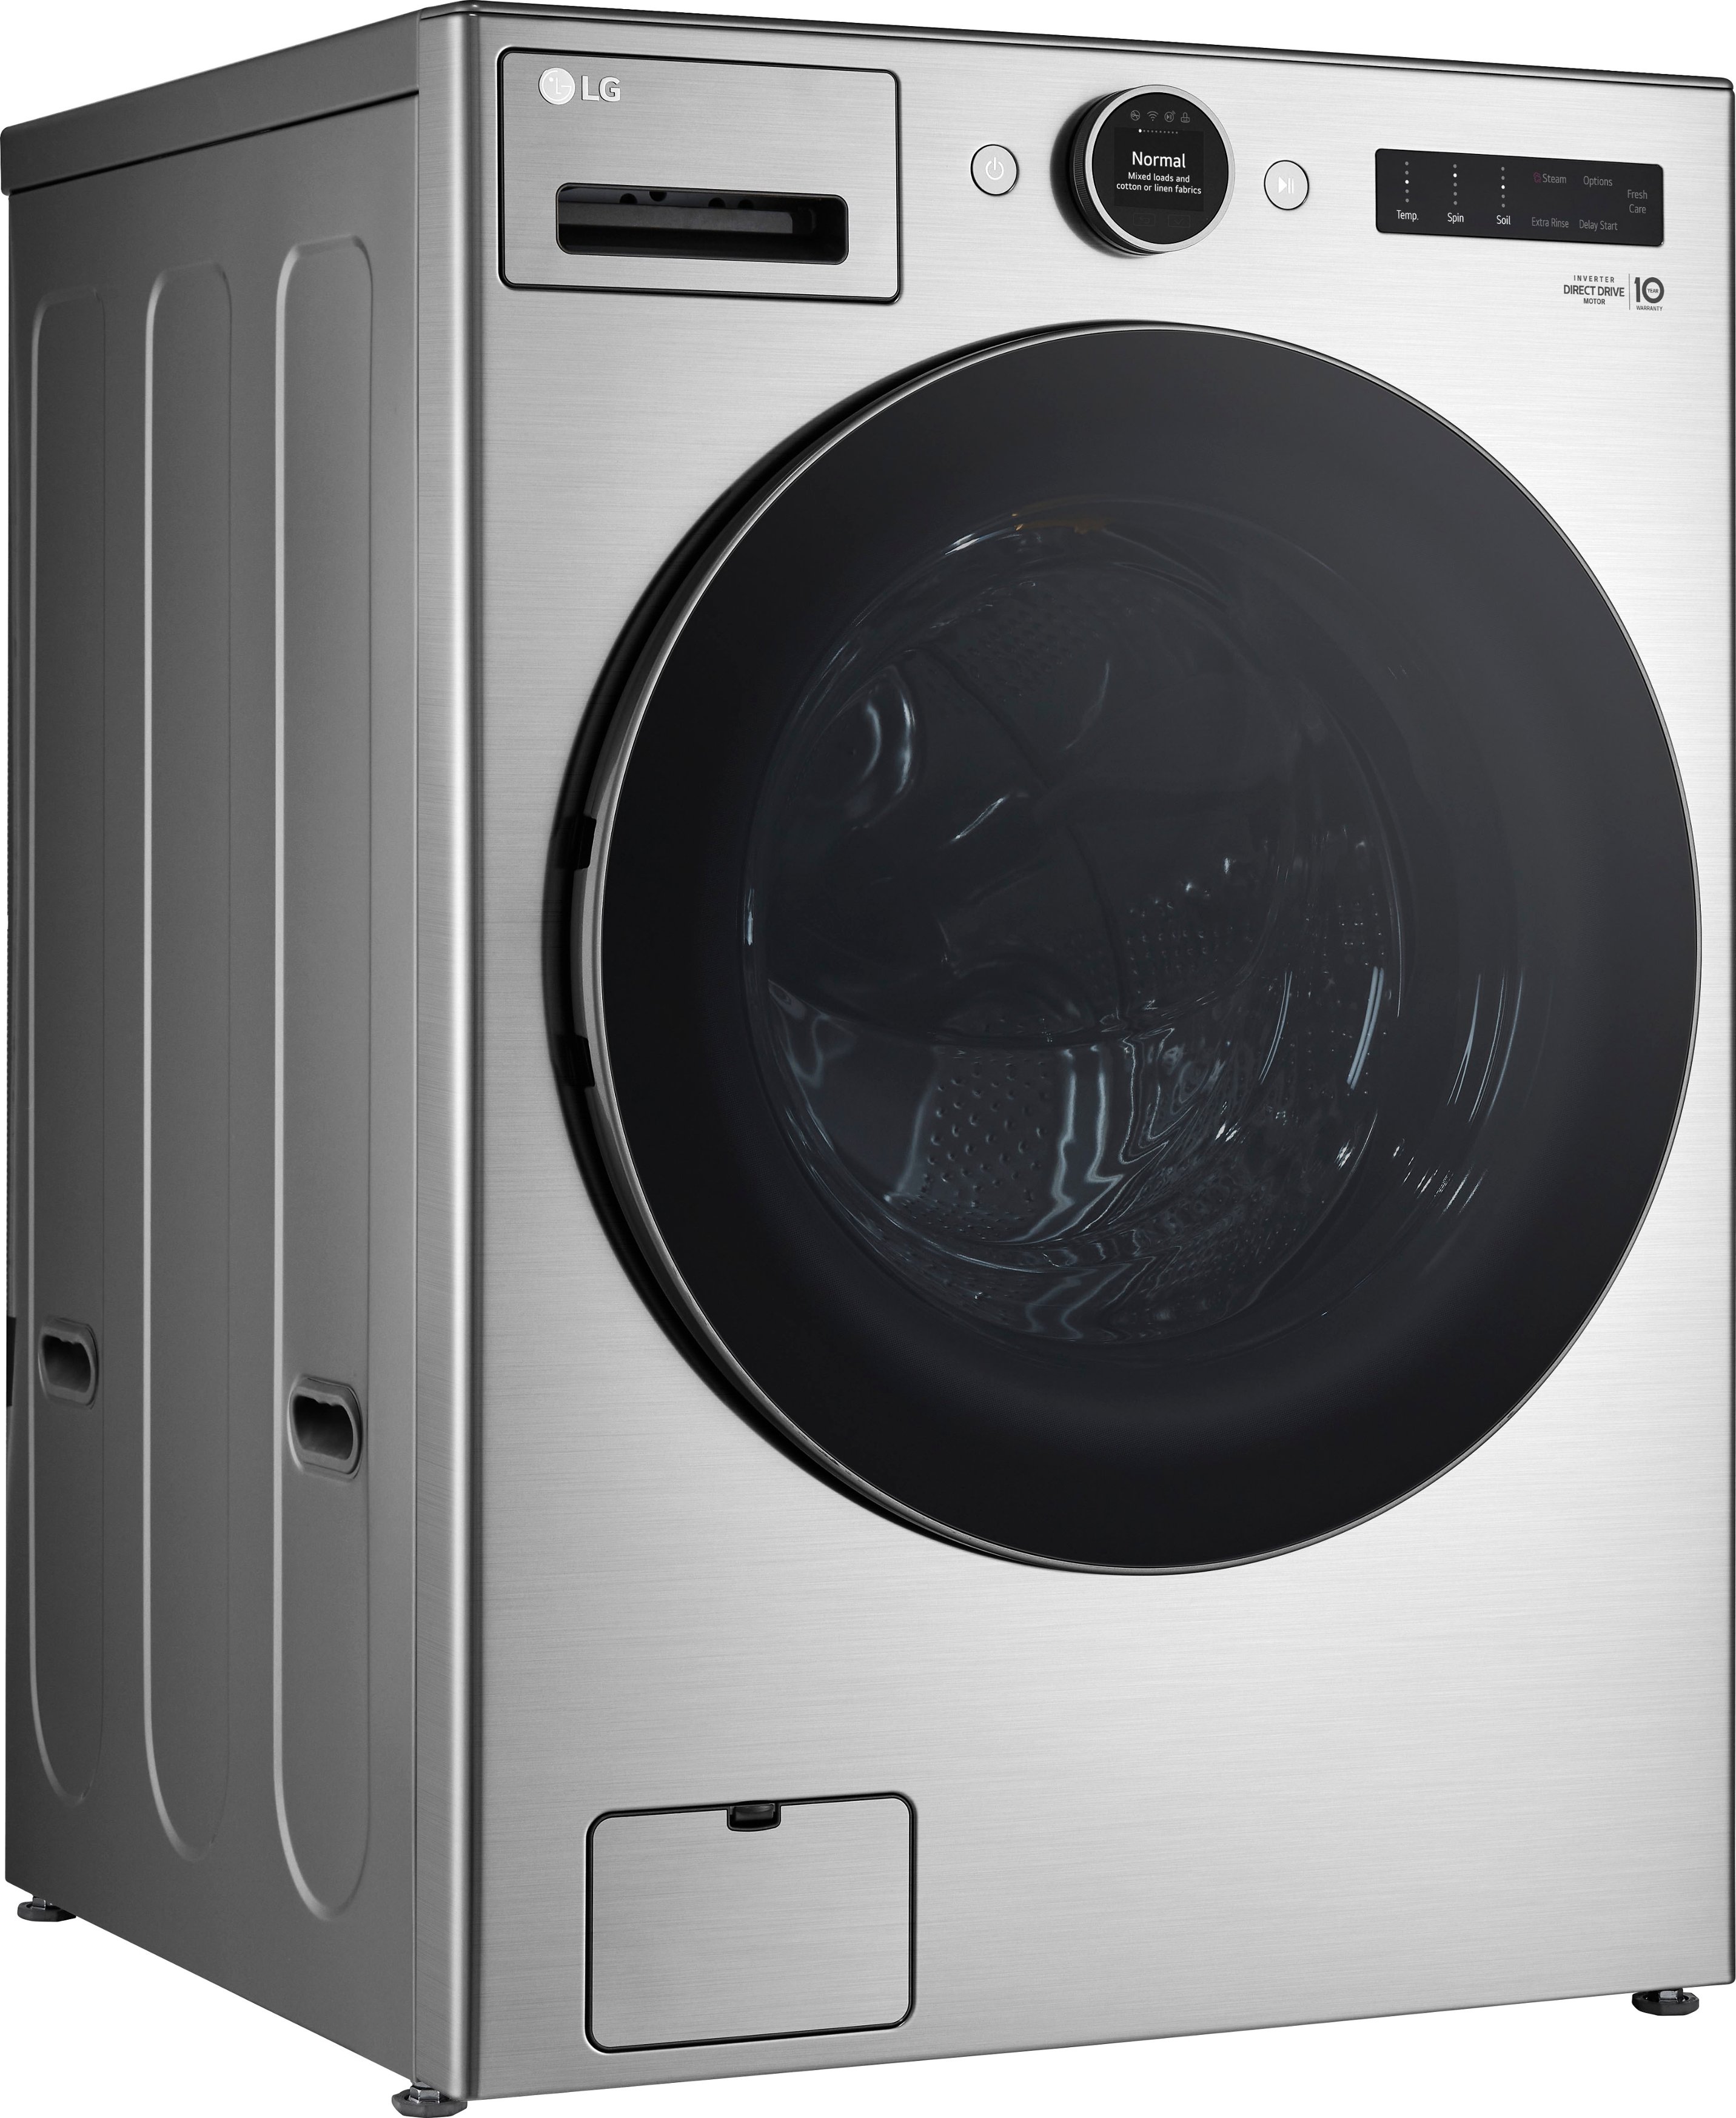 Angle View: LG - 4.5 Cu. Ft. High-Efficiency Smart Front Load Washer with Steam and TurboWash 360 - Graphite Steel